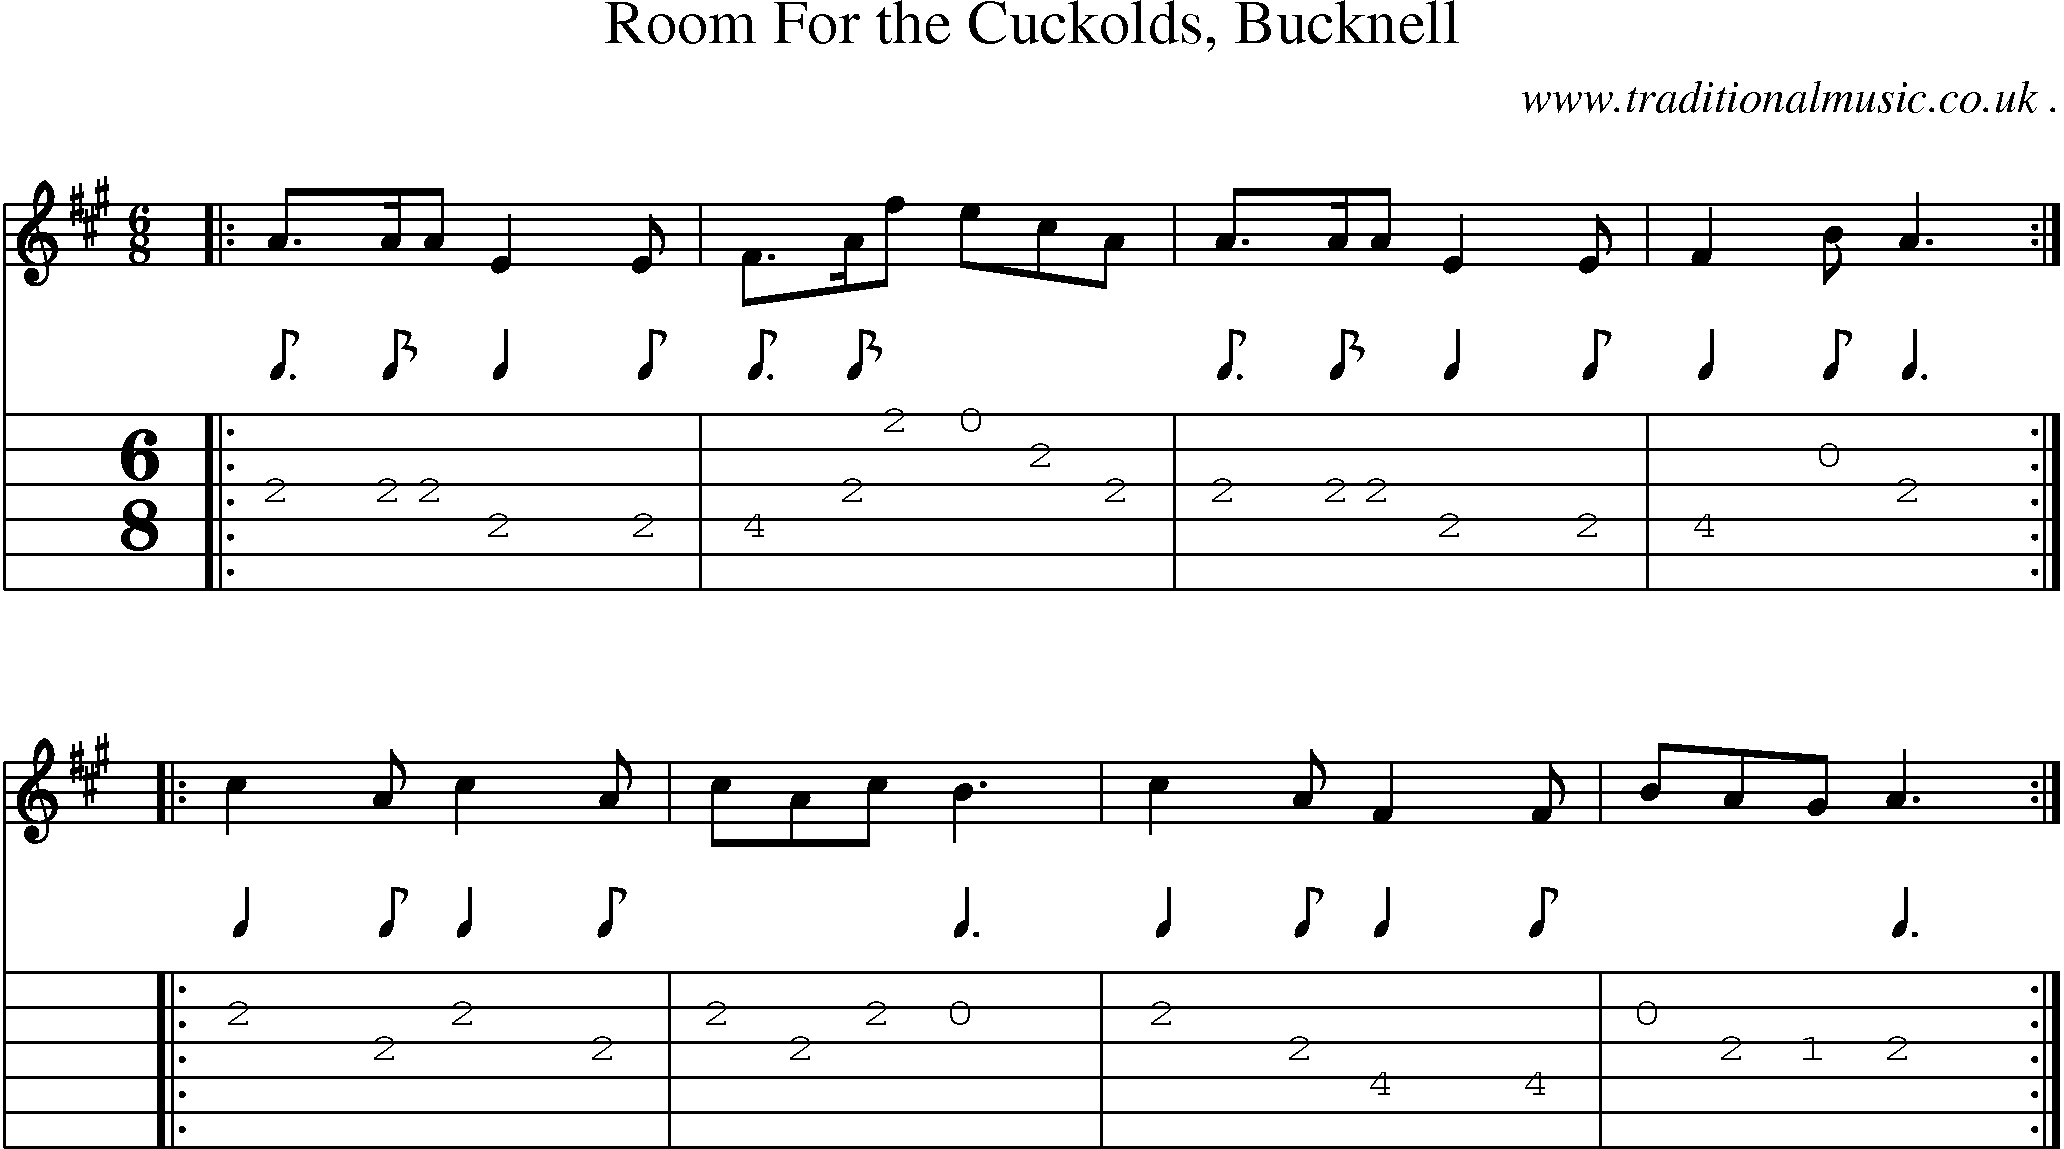 Sheet-Music and Guitar Tabs for Room For The Cuckolds Bucknell